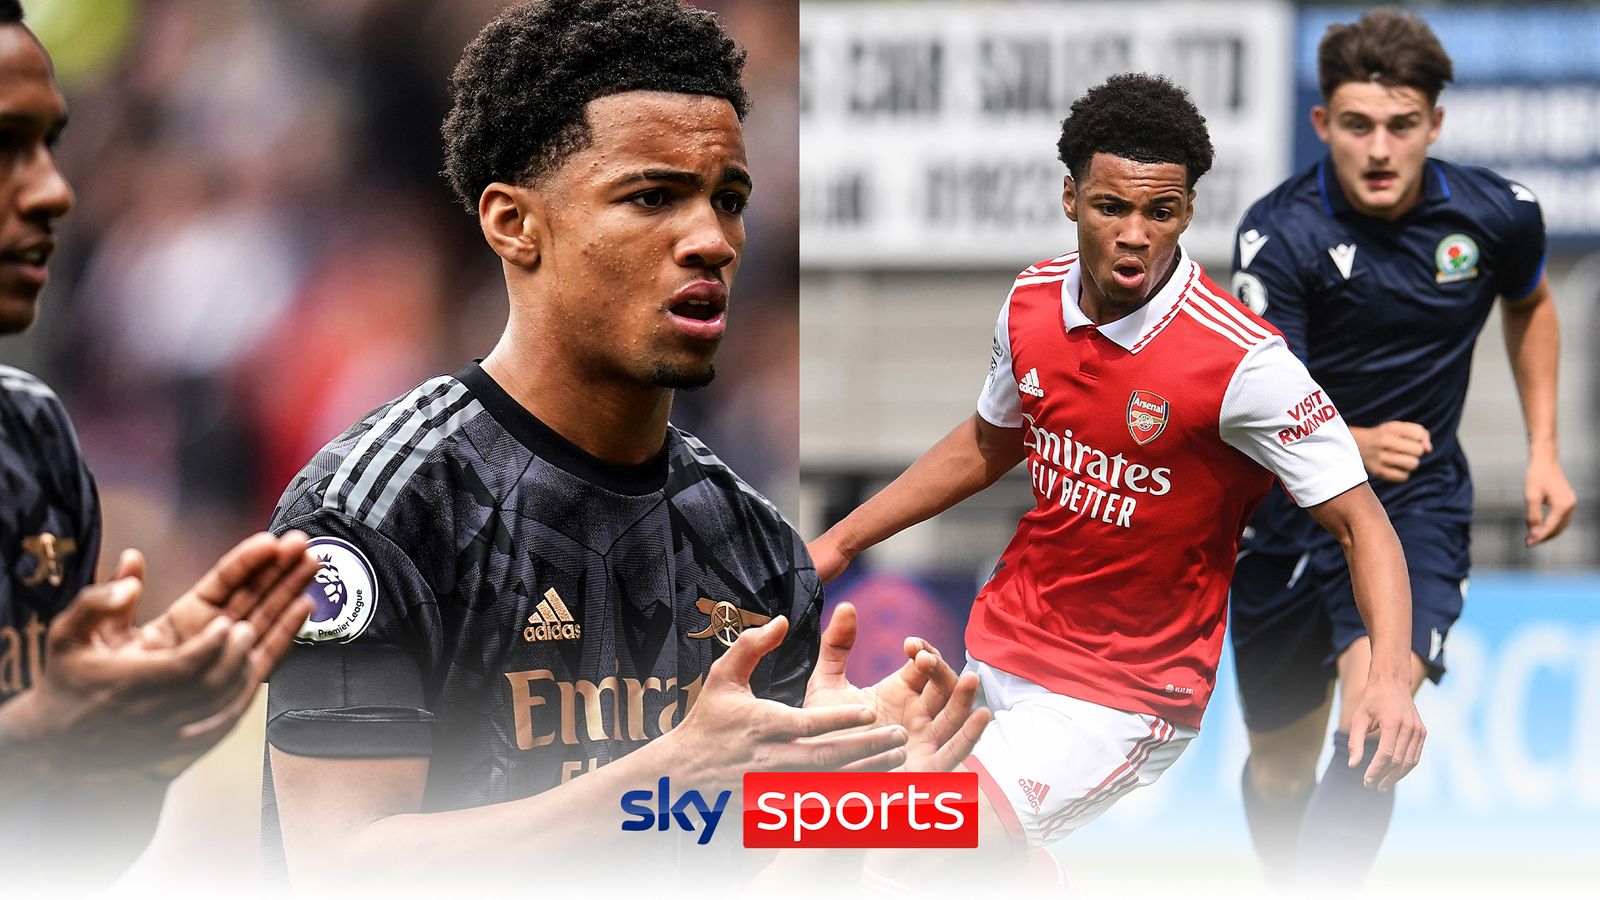 ethan-nwaneri-inside-the-rise-of-the-arsenal-teenager-15-who-became-the-youngest-ever-premier-league-player